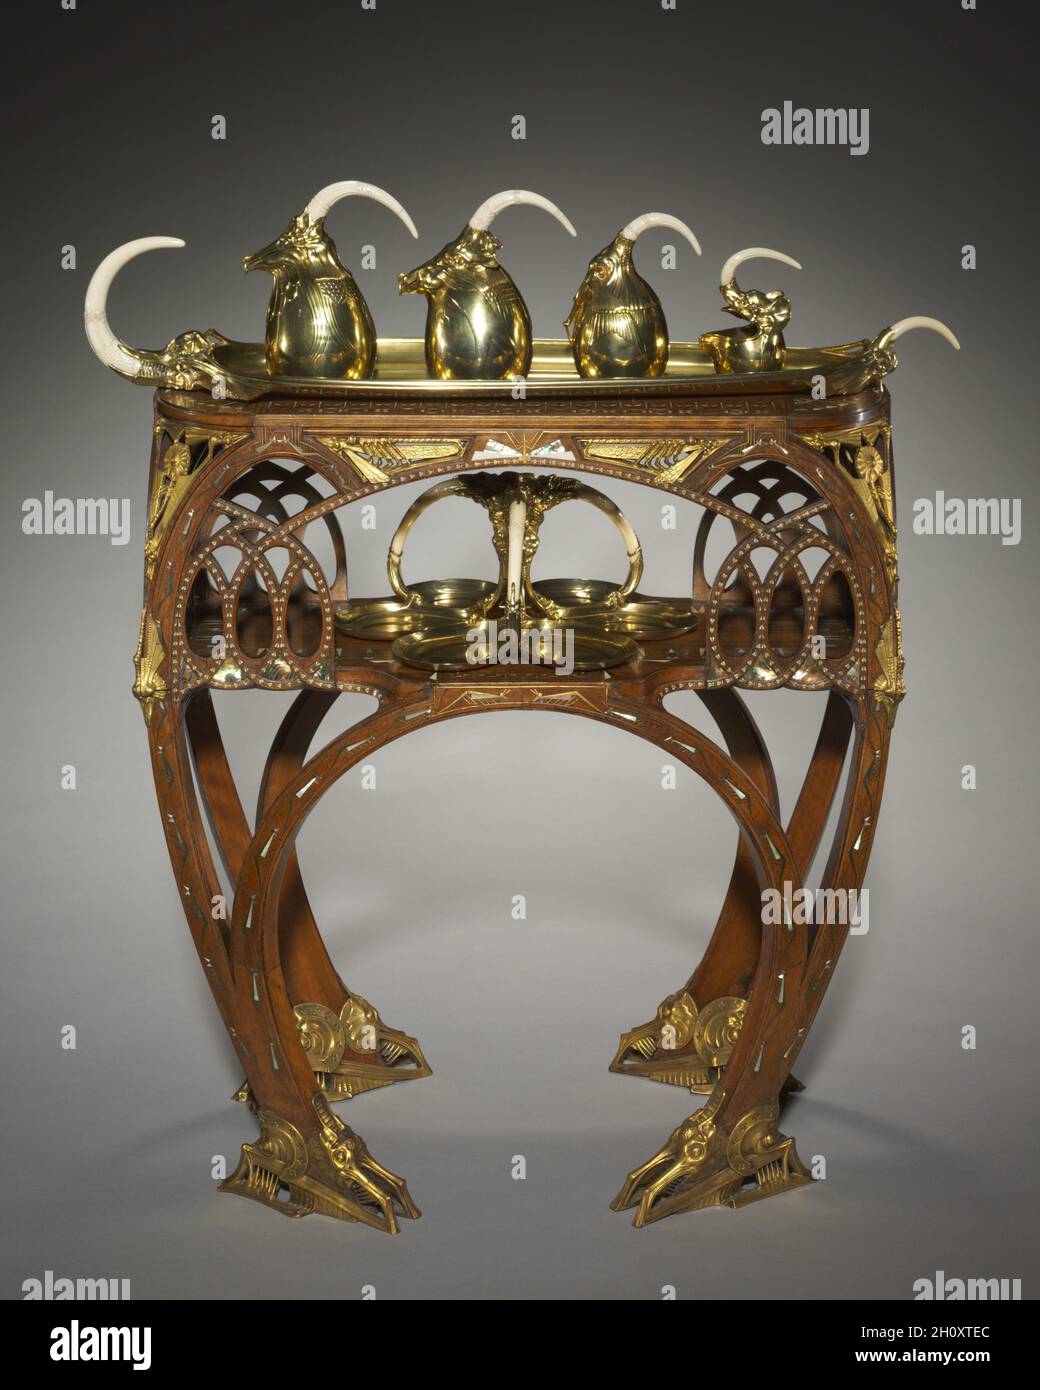 Tea Table, c. 1907. Carlo Bugatti (Italian, 1856-1940). Inlaid wood (mahogany?), cast and gilded bronze mounts, inlays of ivory or bone, metal, and mother-of-pearl (marine mussels or pearl oysters); overall: 71.5 x 67.1 x 41.3 cm (28 1/8 x 26 7/16 x 16 1/4 in.).  Luxurious materials might catch the eye first, but a closer look reveals the imaginary creatures that adorn the surface of this table. Featuring elaborate arches, a favorite motif that appeared throughout Bugatti's furniture, this fantastical imagery is a window into the designer's expressive imagination. Stock Photo